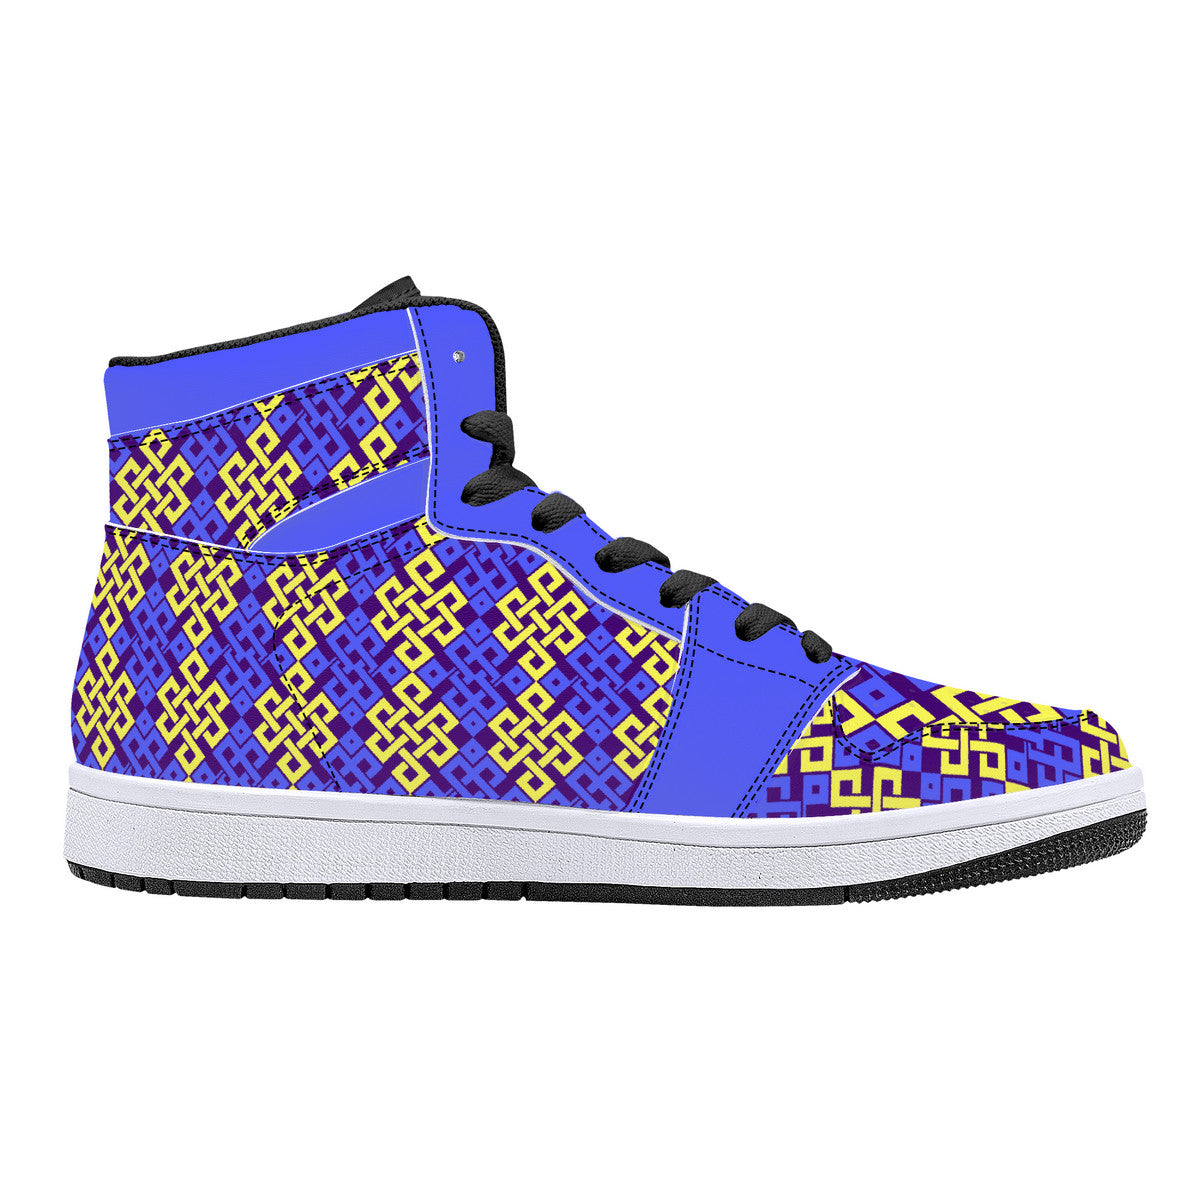 "Karma" High-Top Synthetic Leather Sneakers